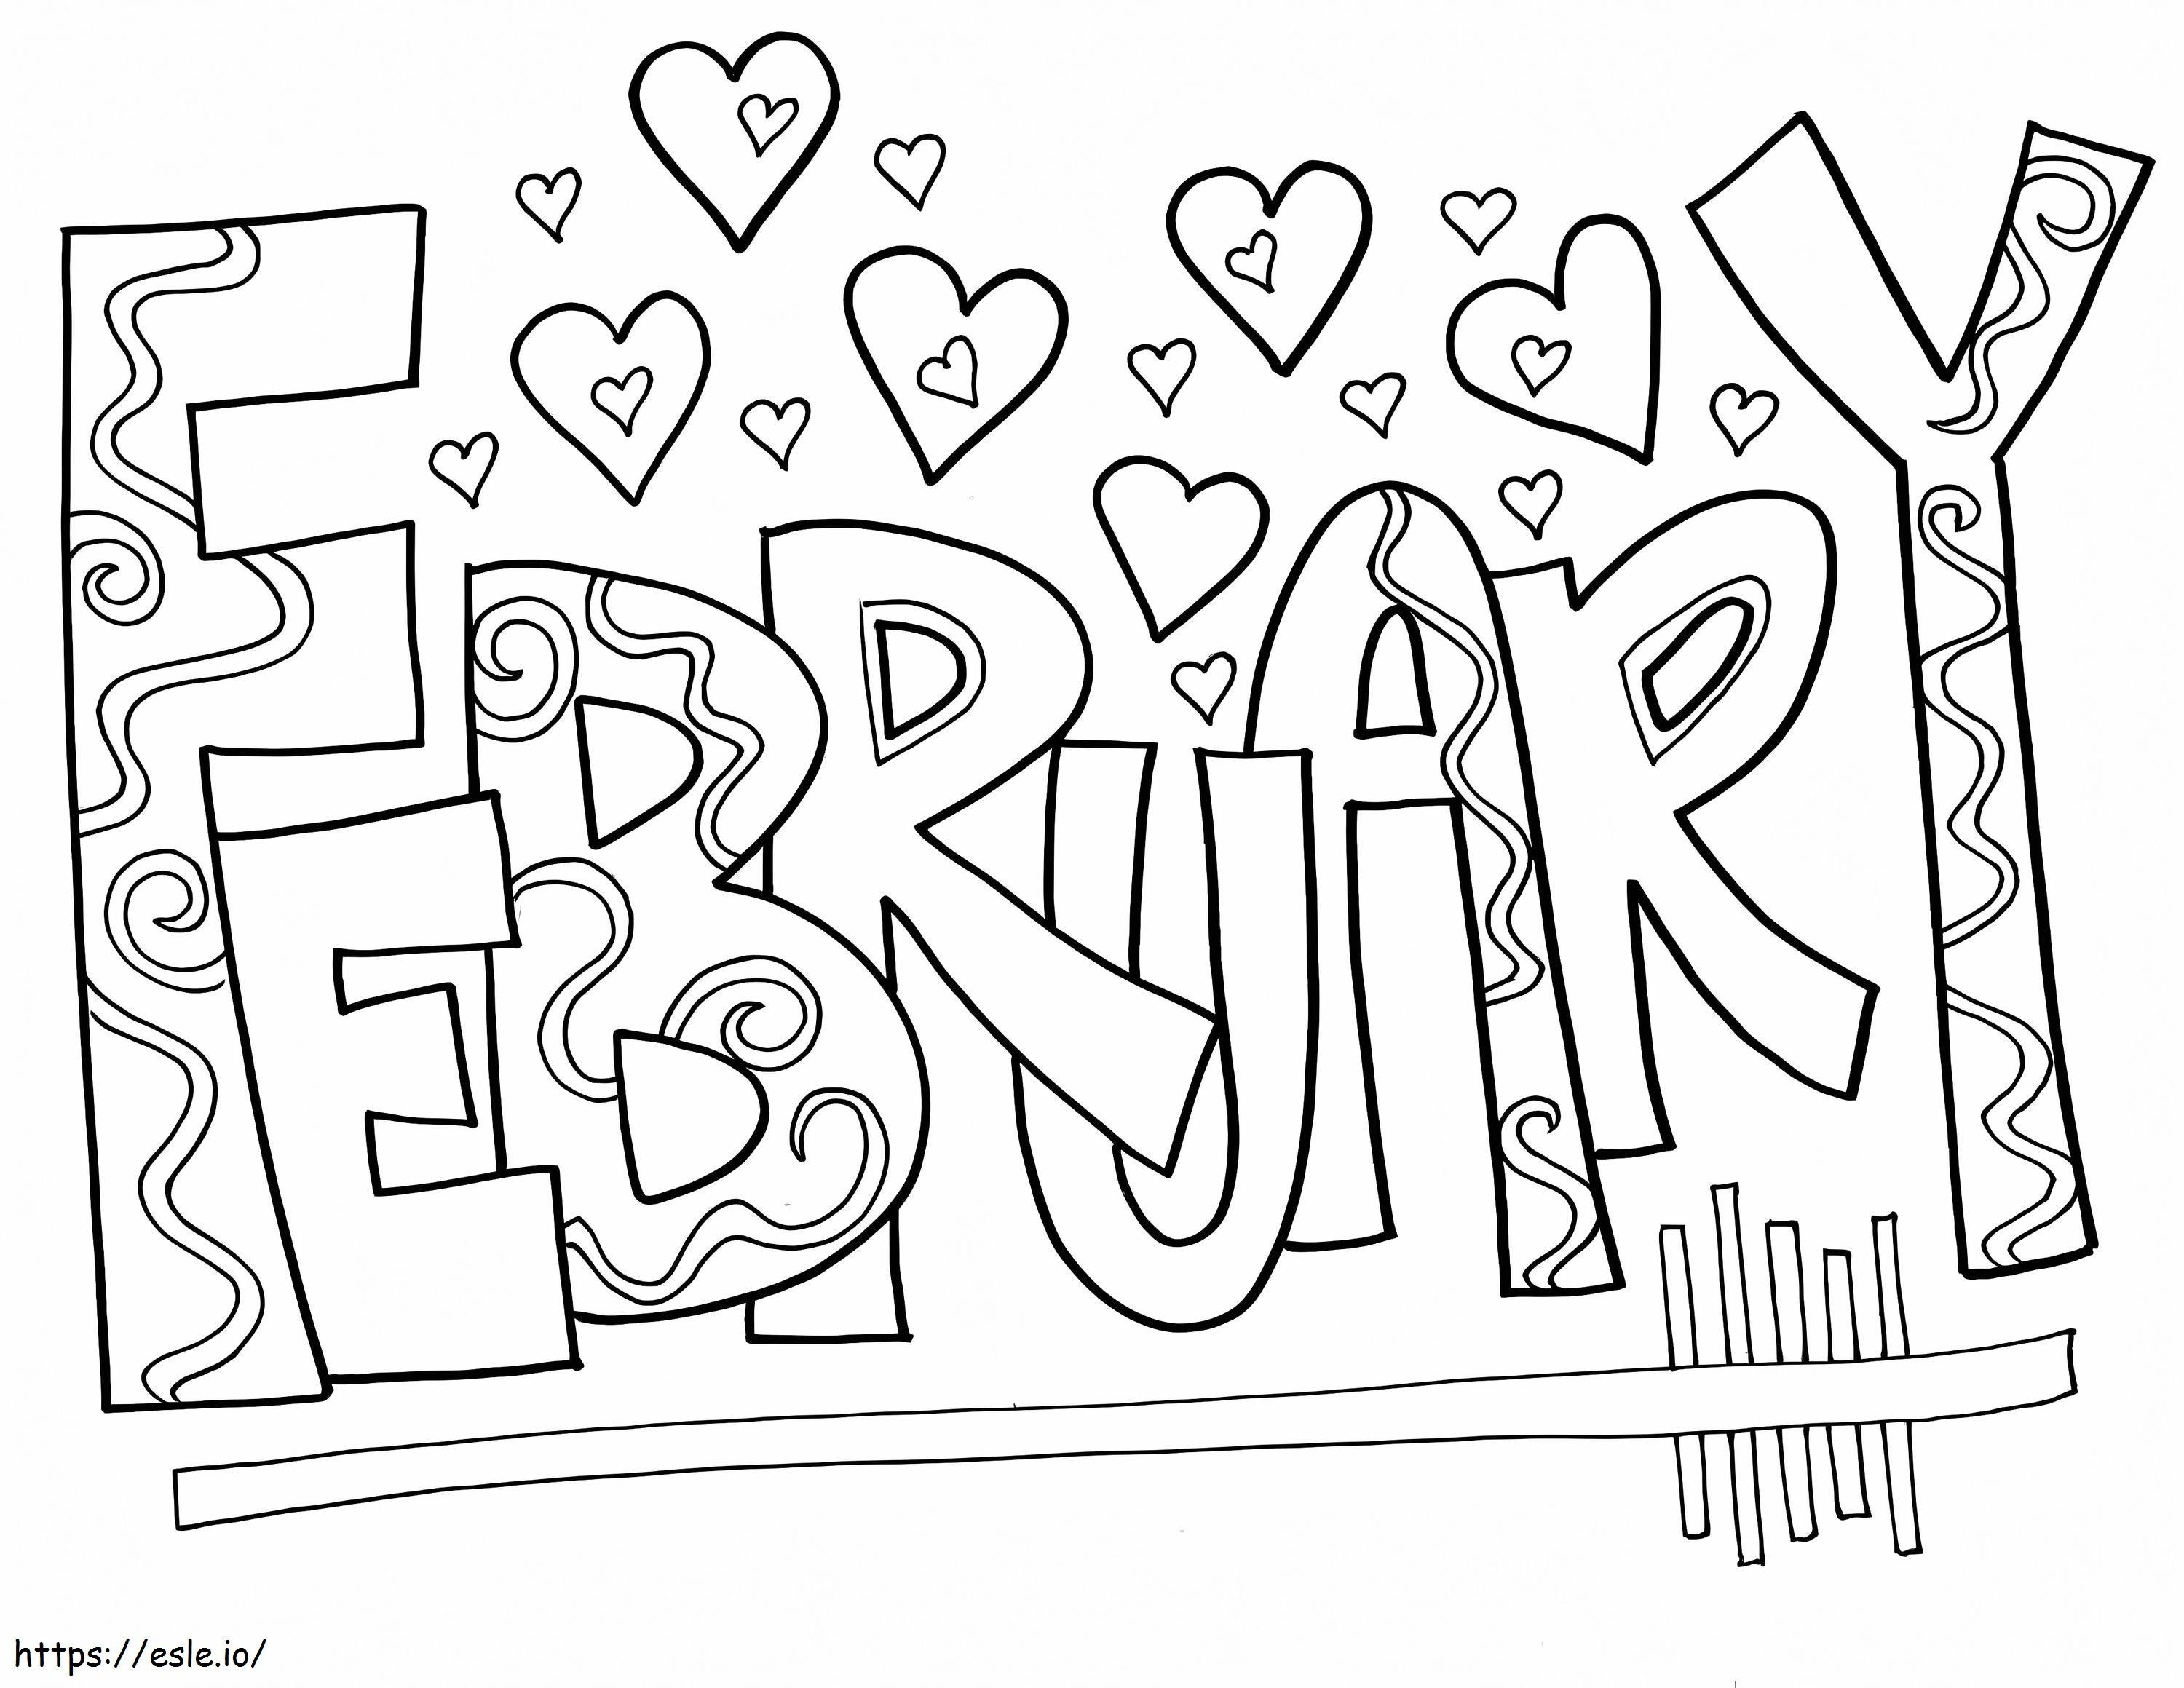 February 1 coloring page